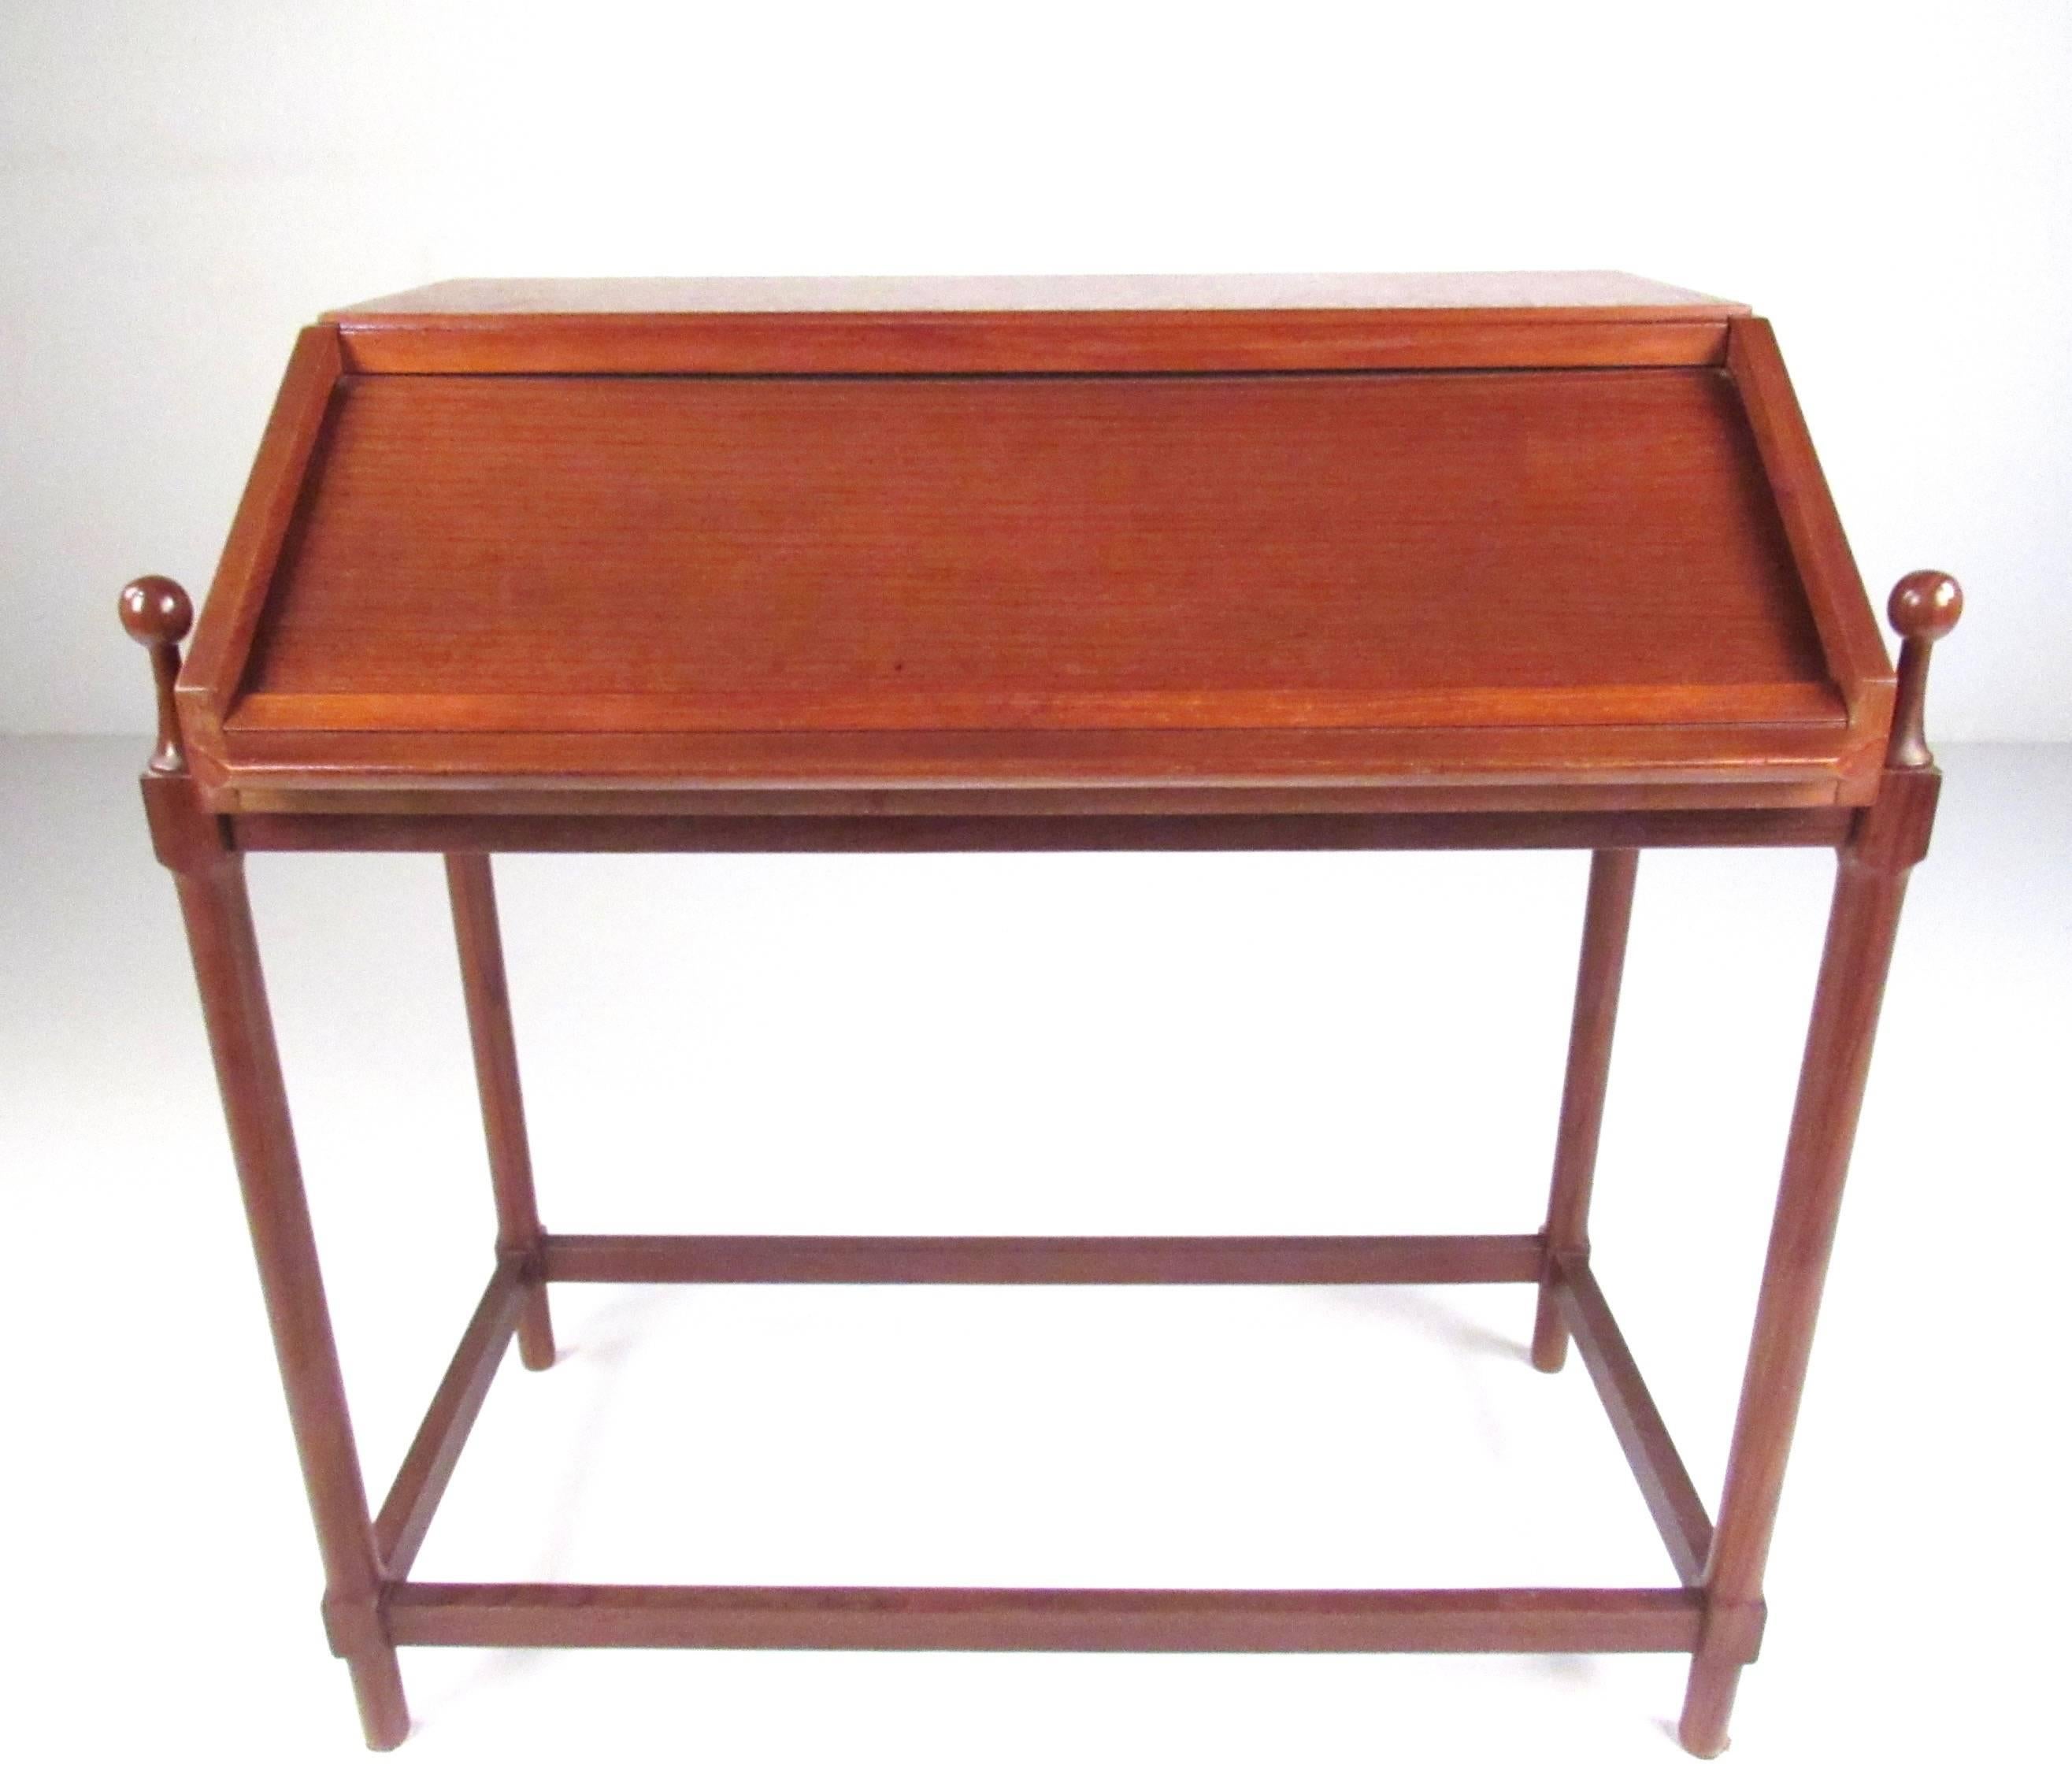 This stylish 1960s Italian desk by Proserpio Fratelli features elegant design and a rich natural teak finish. Roll top writing industry opens up to offer a pull-out writing surface and concealed storage compartments. Sculpted frame adds to the